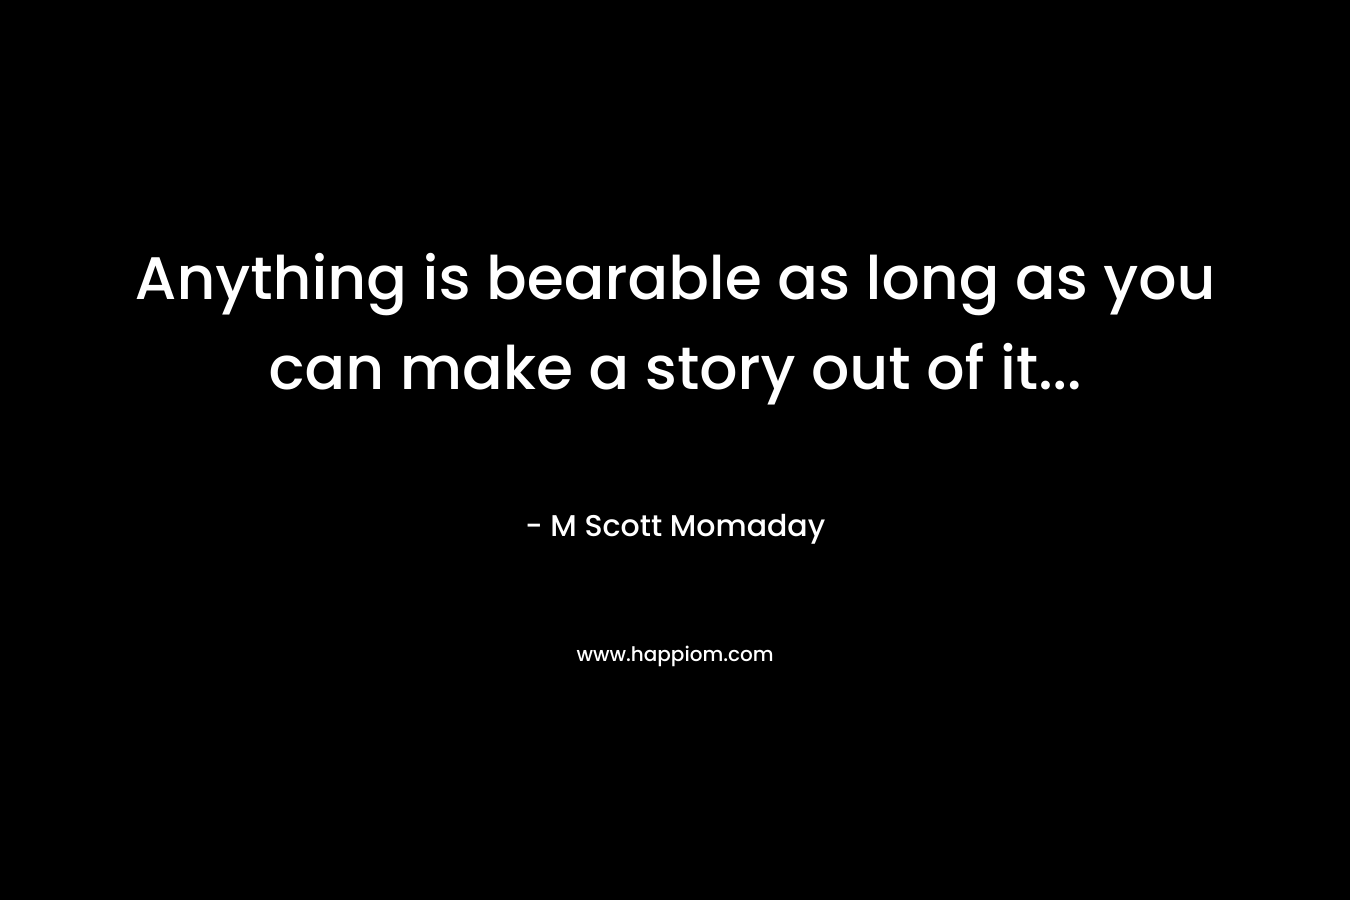 Anything is bearable as long as you can make a story out of it… – M Scott Momaday